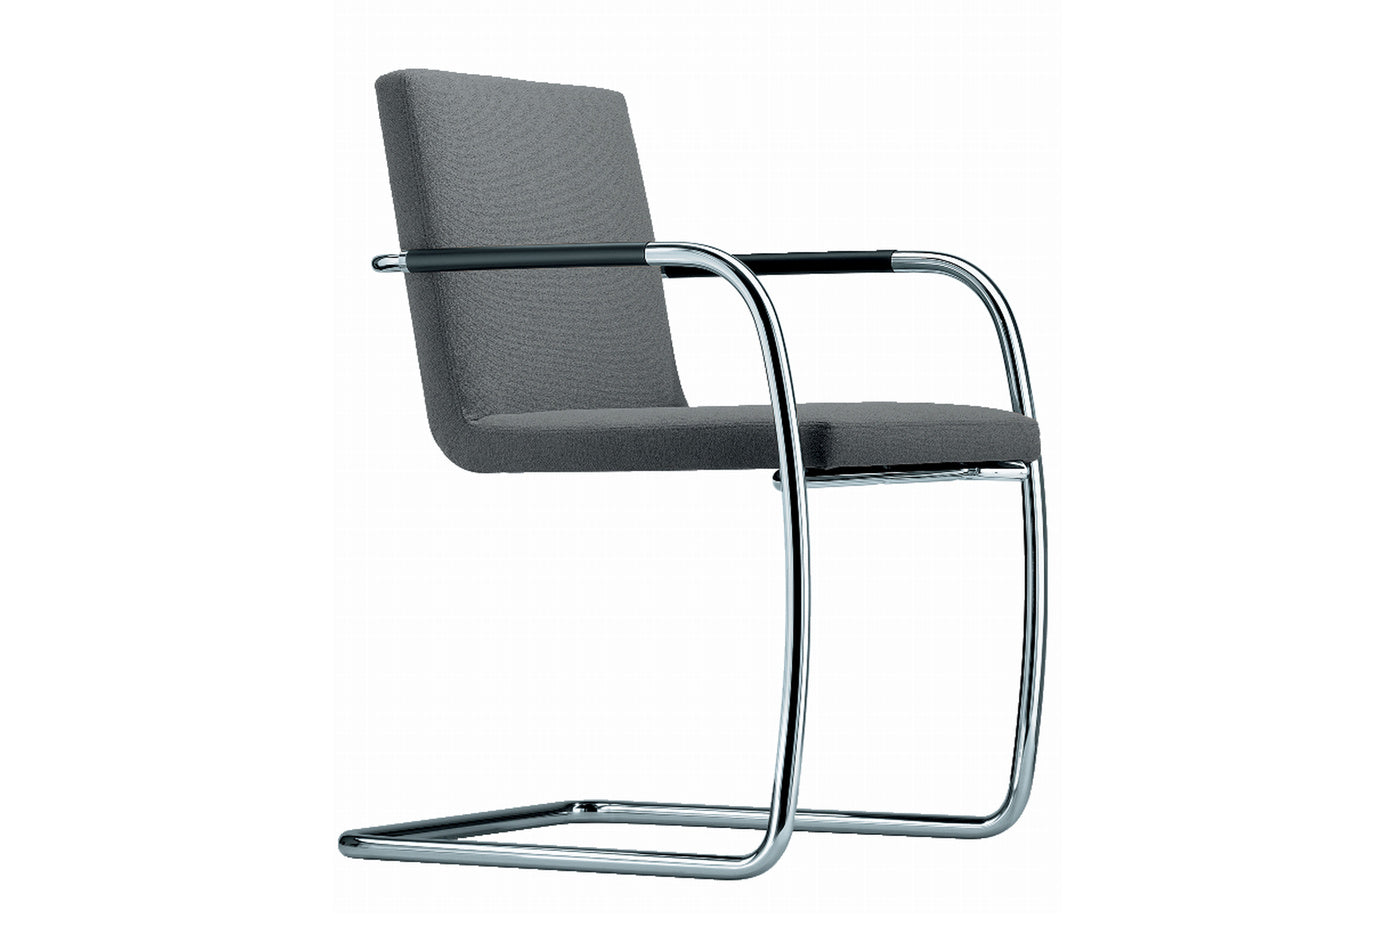 THONET S 60 cantilever chair